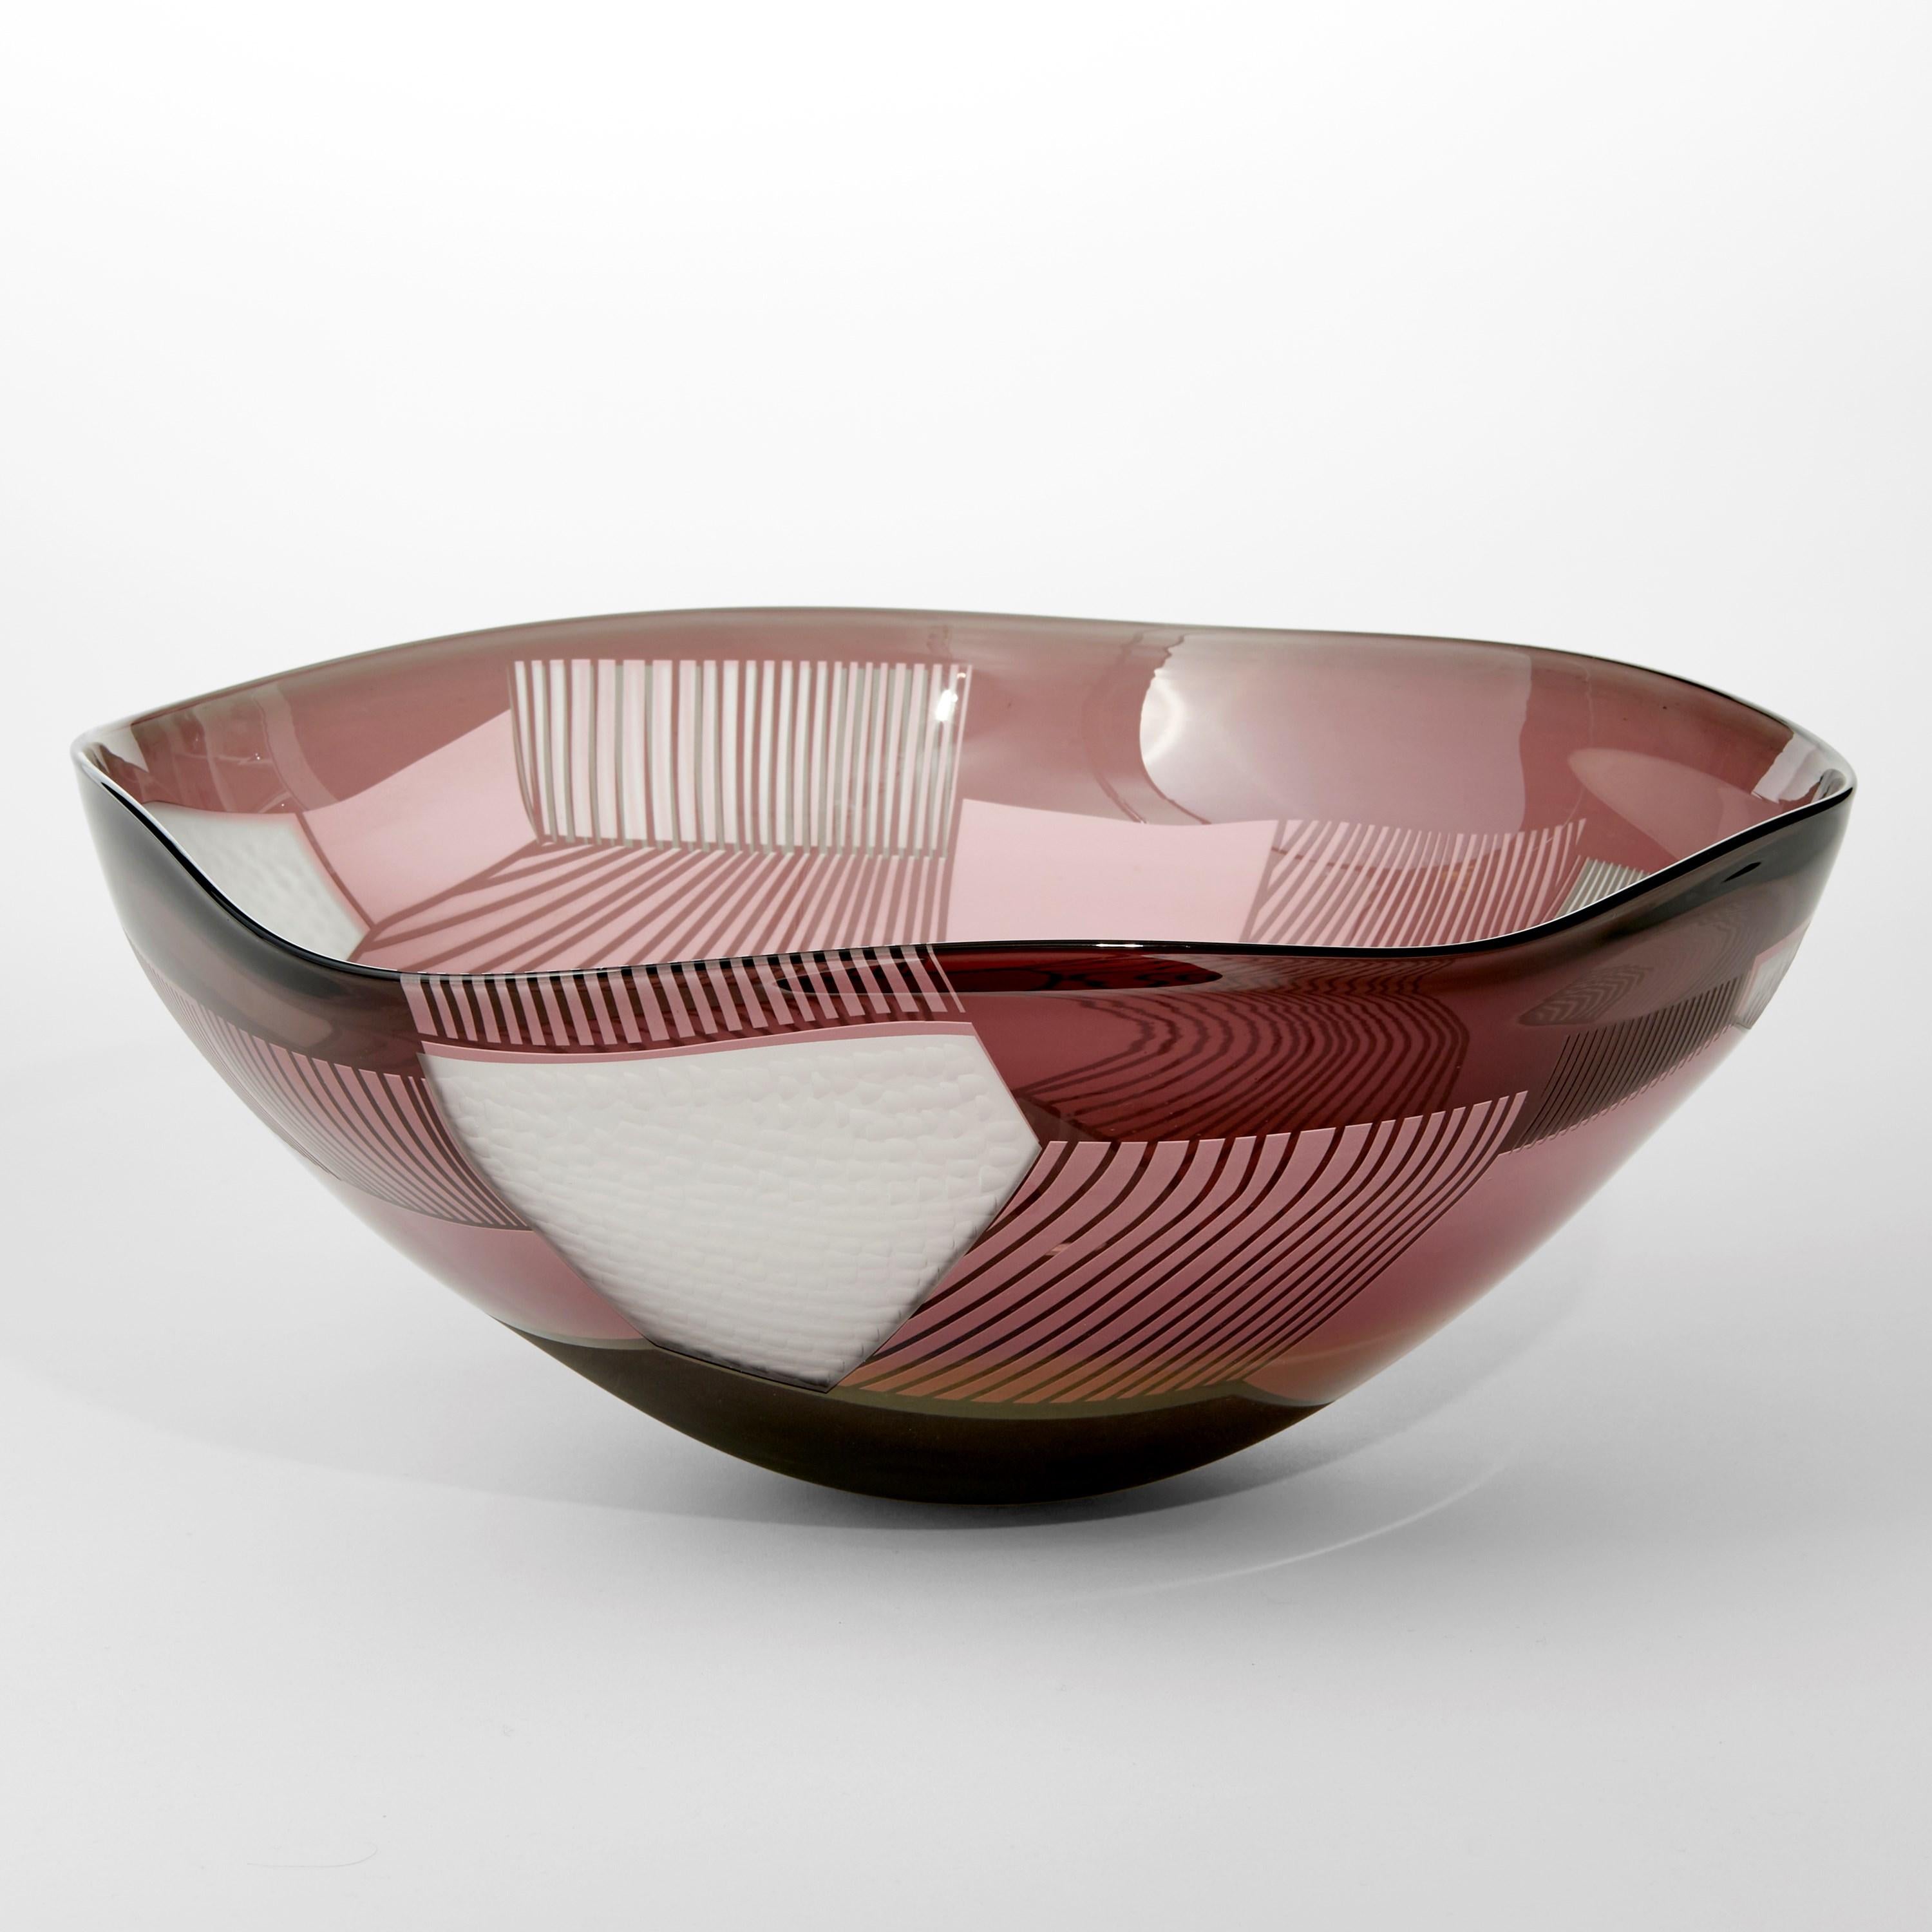 'Landscape Study Pink over Grey' is a unique handblown and cut glass sculptural bowl by the British artist, Kate Jones of Gillies Jones.

Gillies Jones established their partnership in 1995 with a shared passion to explore blown art glass. Works